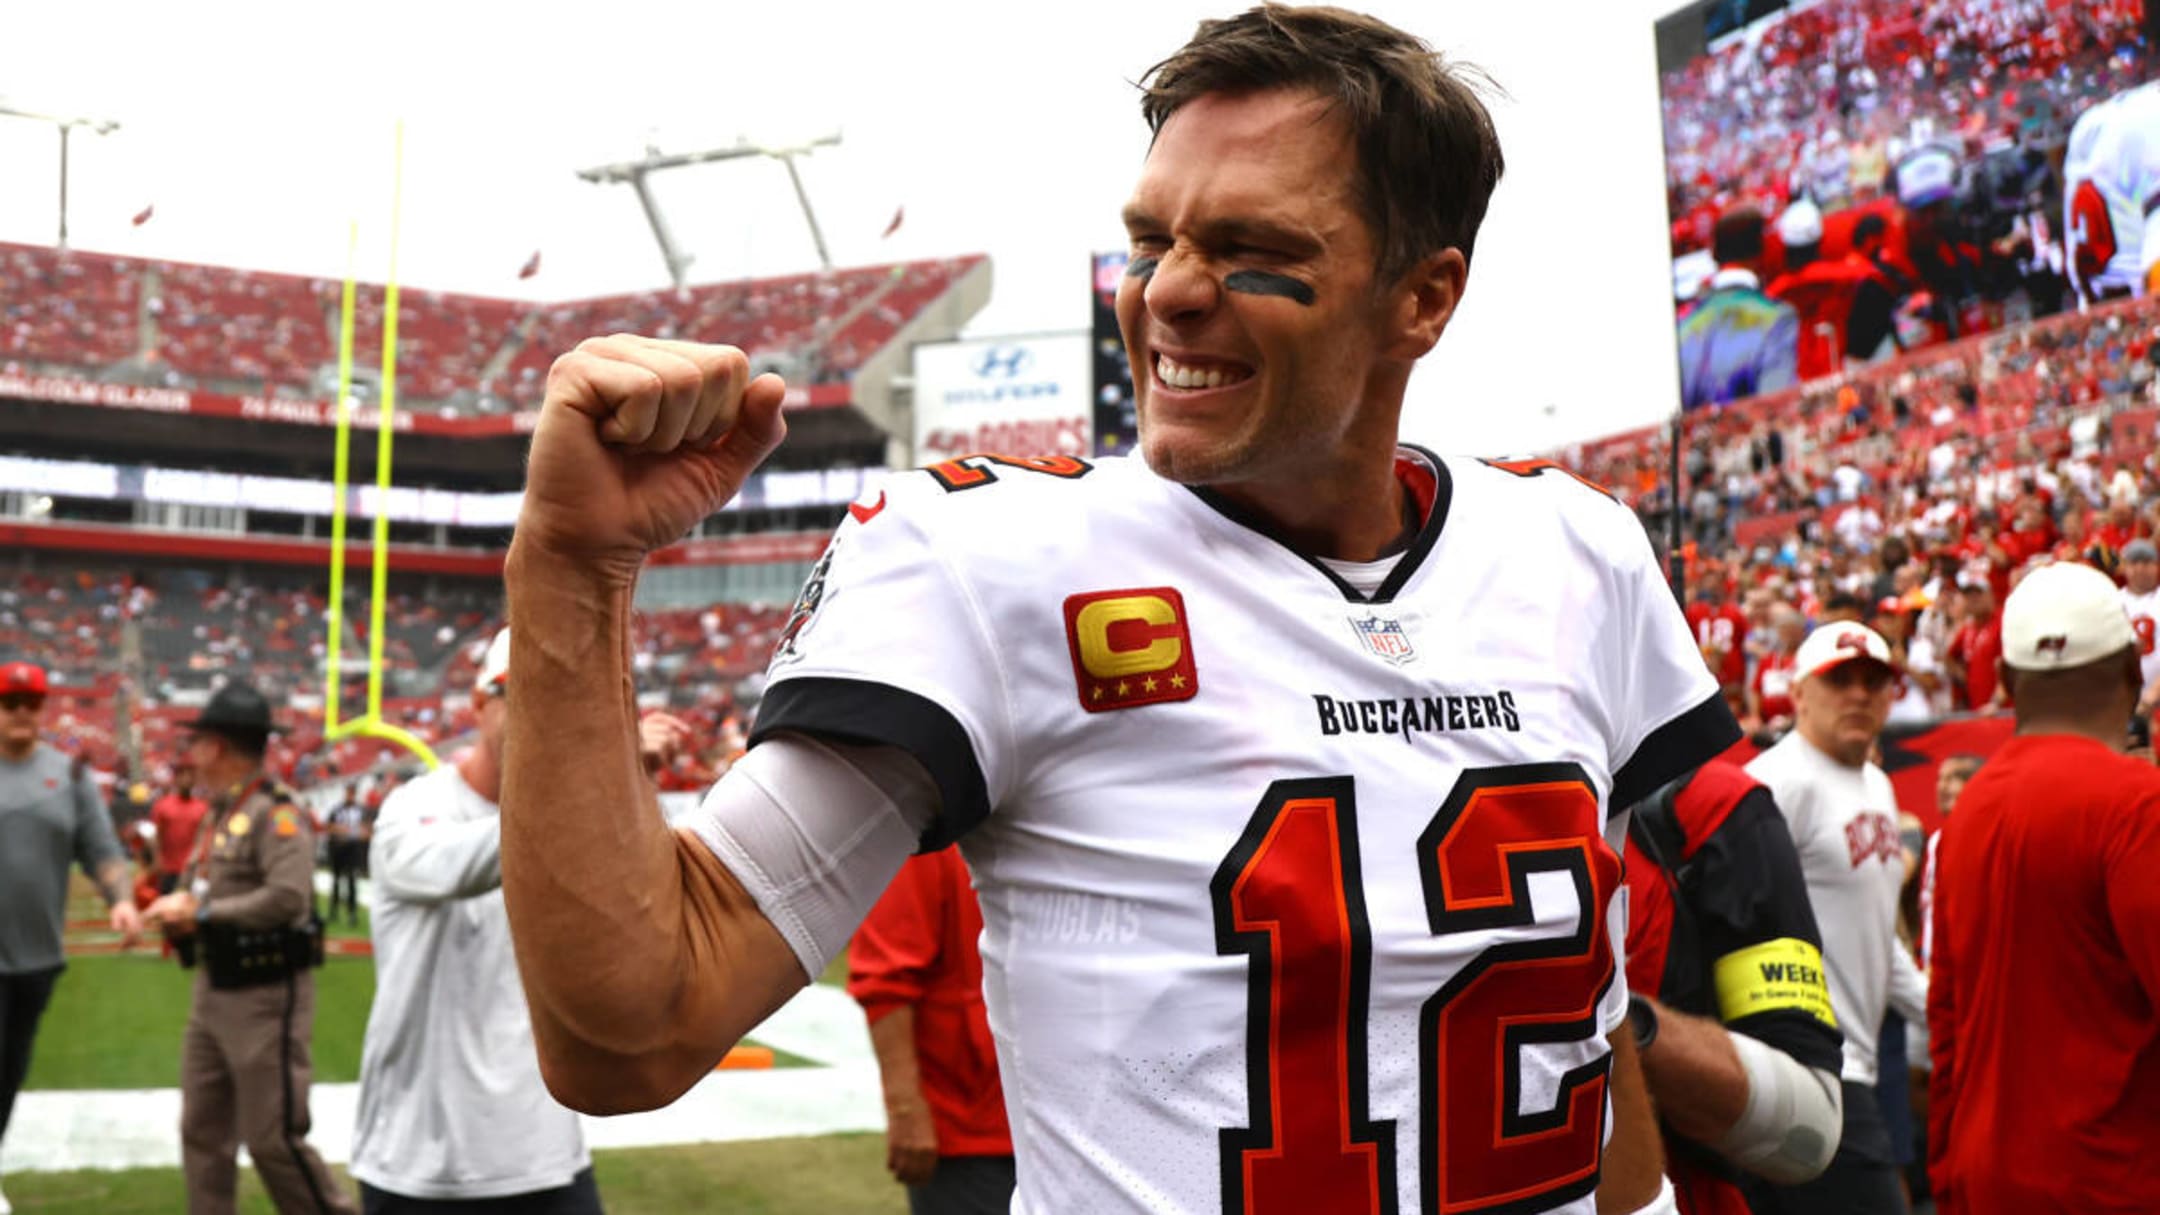 Game Worn Tom Brady Buccaneers Jersey Sells For Insane $1.2